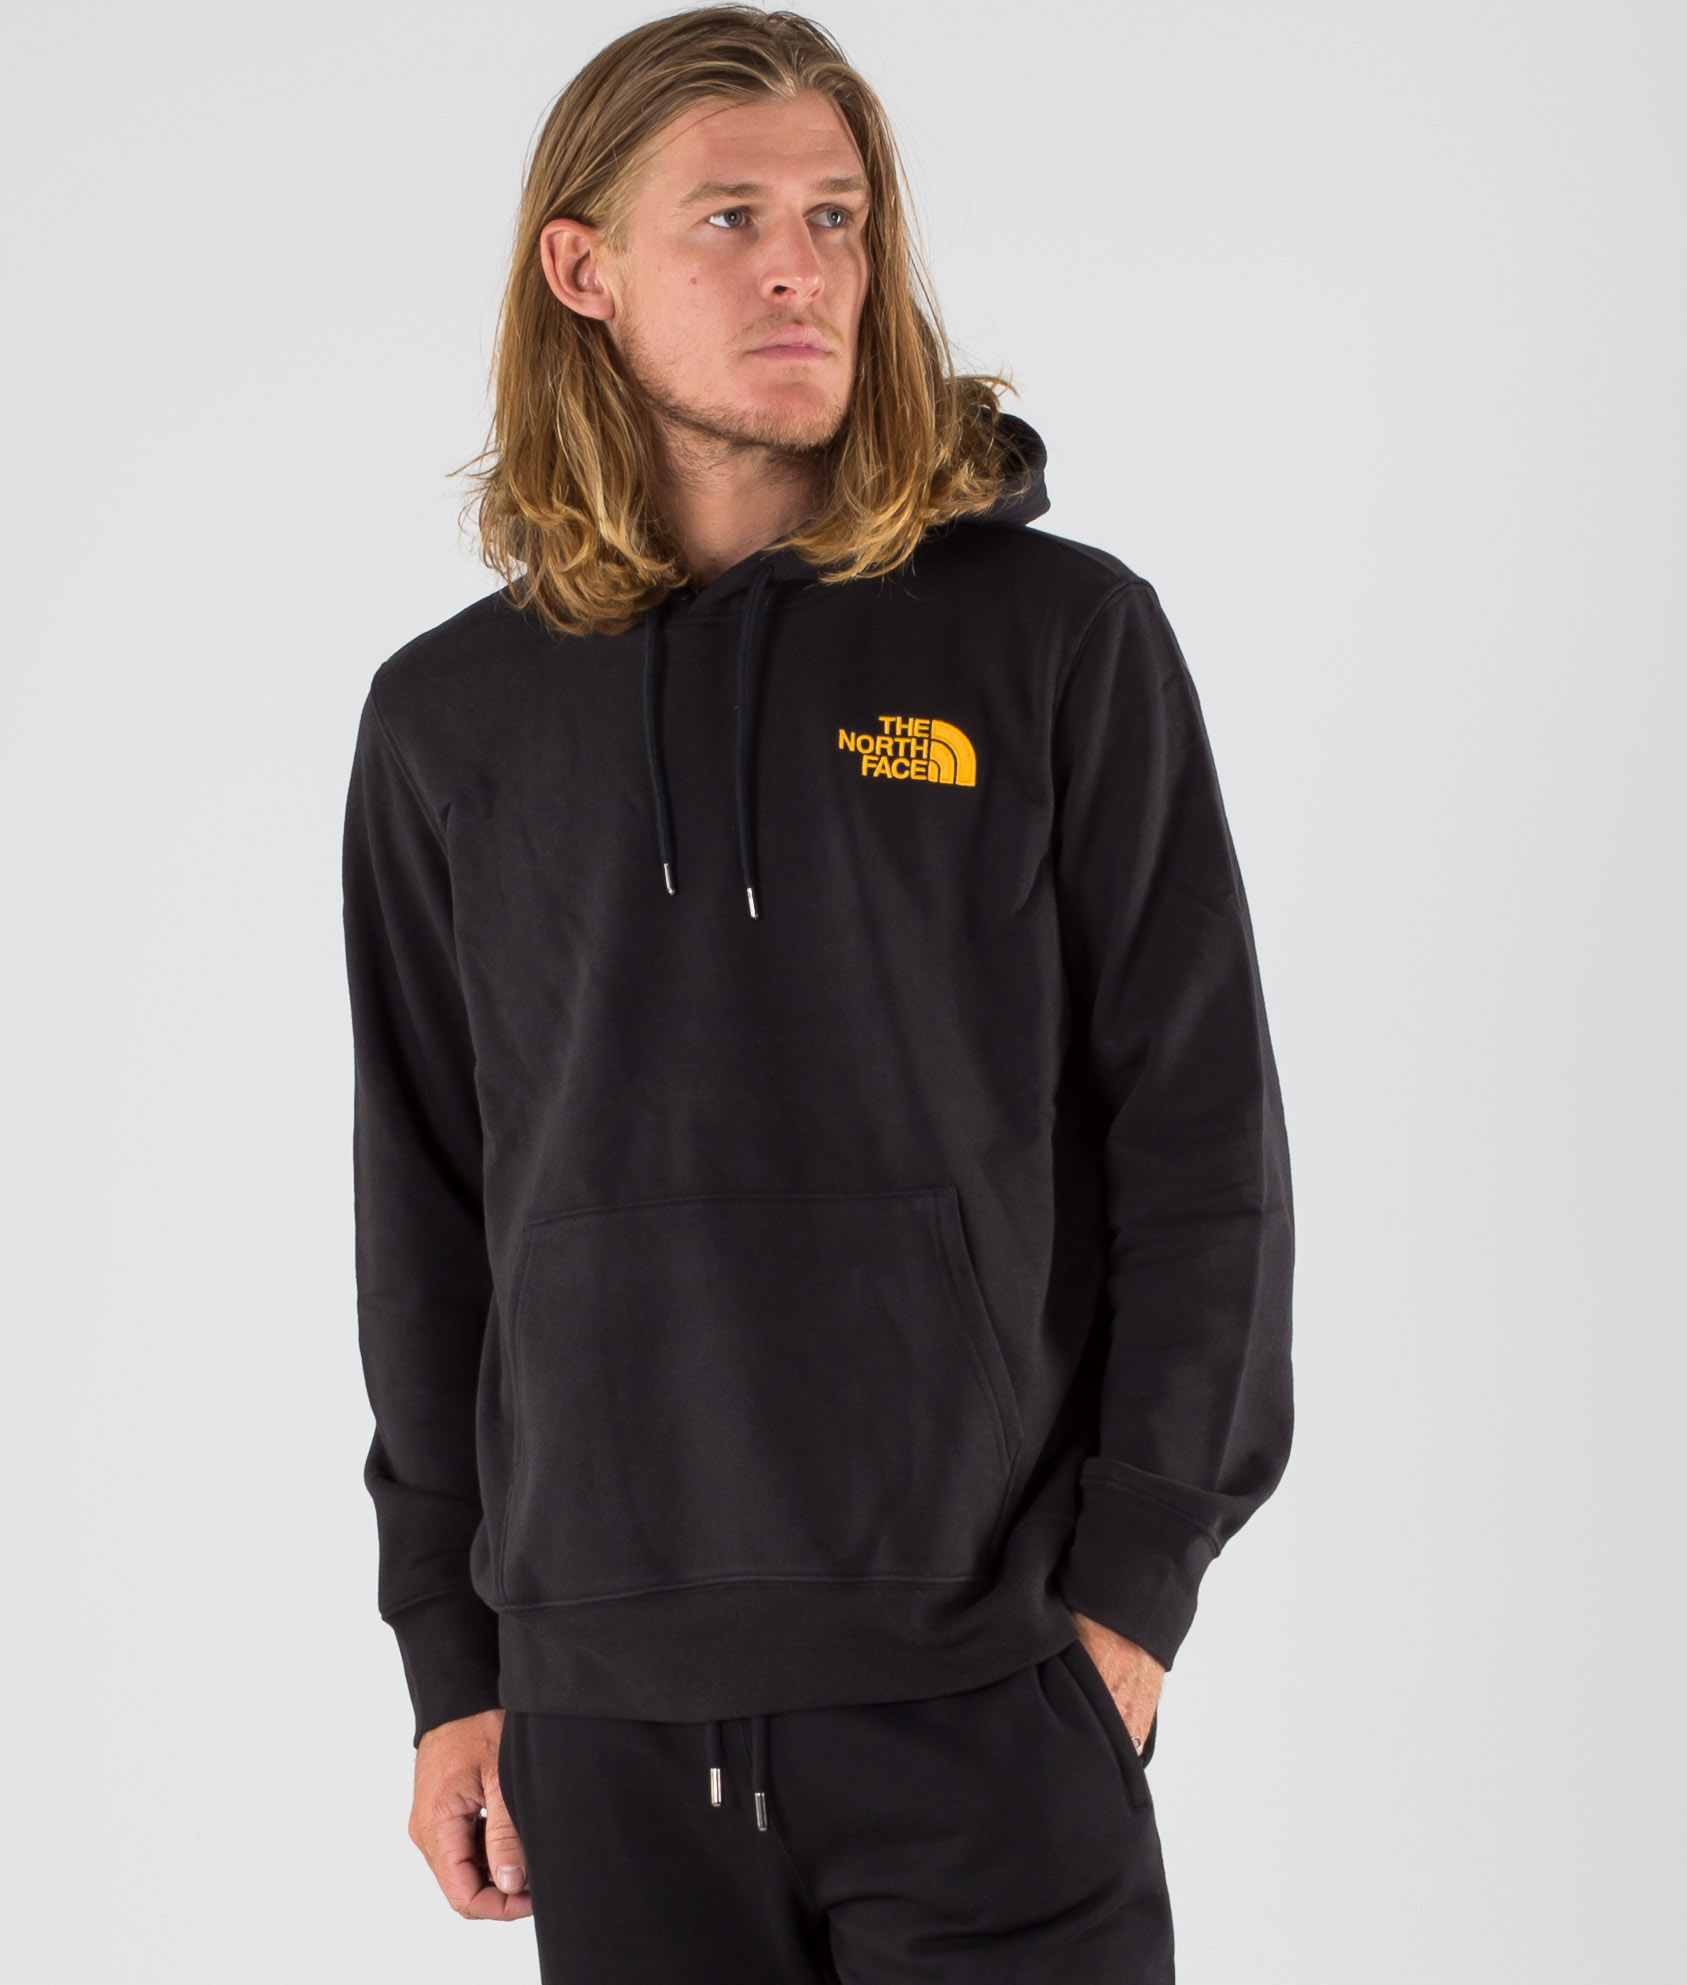 north face black and gold hoodie